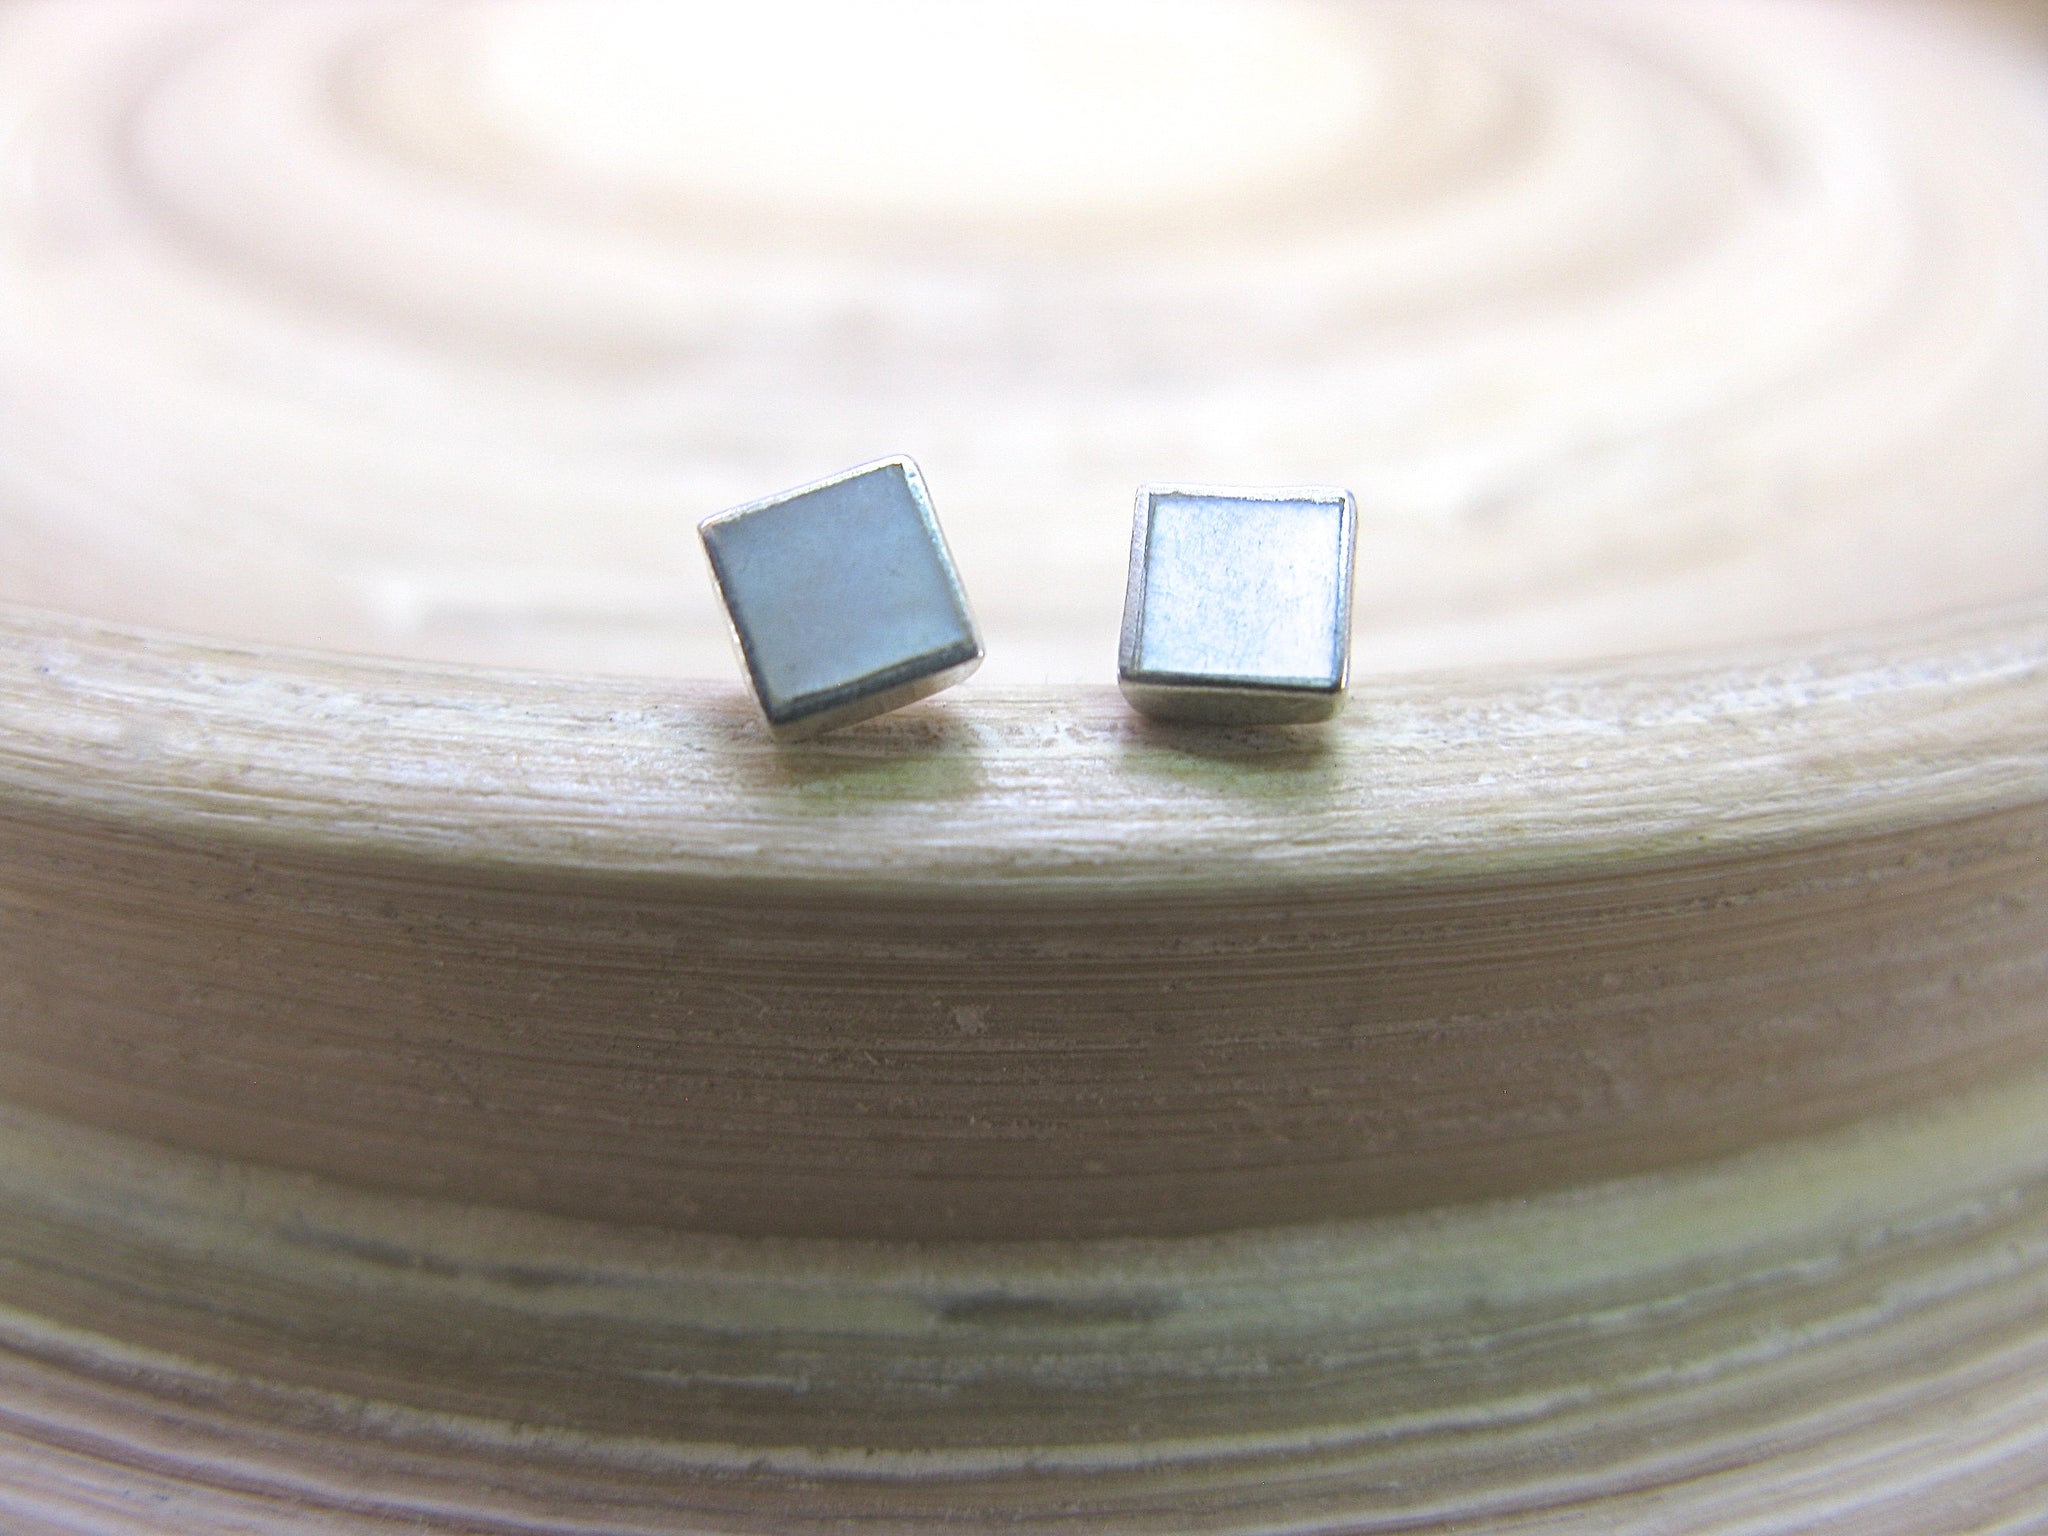 Square Mother of Pearl 4mm Minimalist Stud Earrings in 925 Sterling Silver